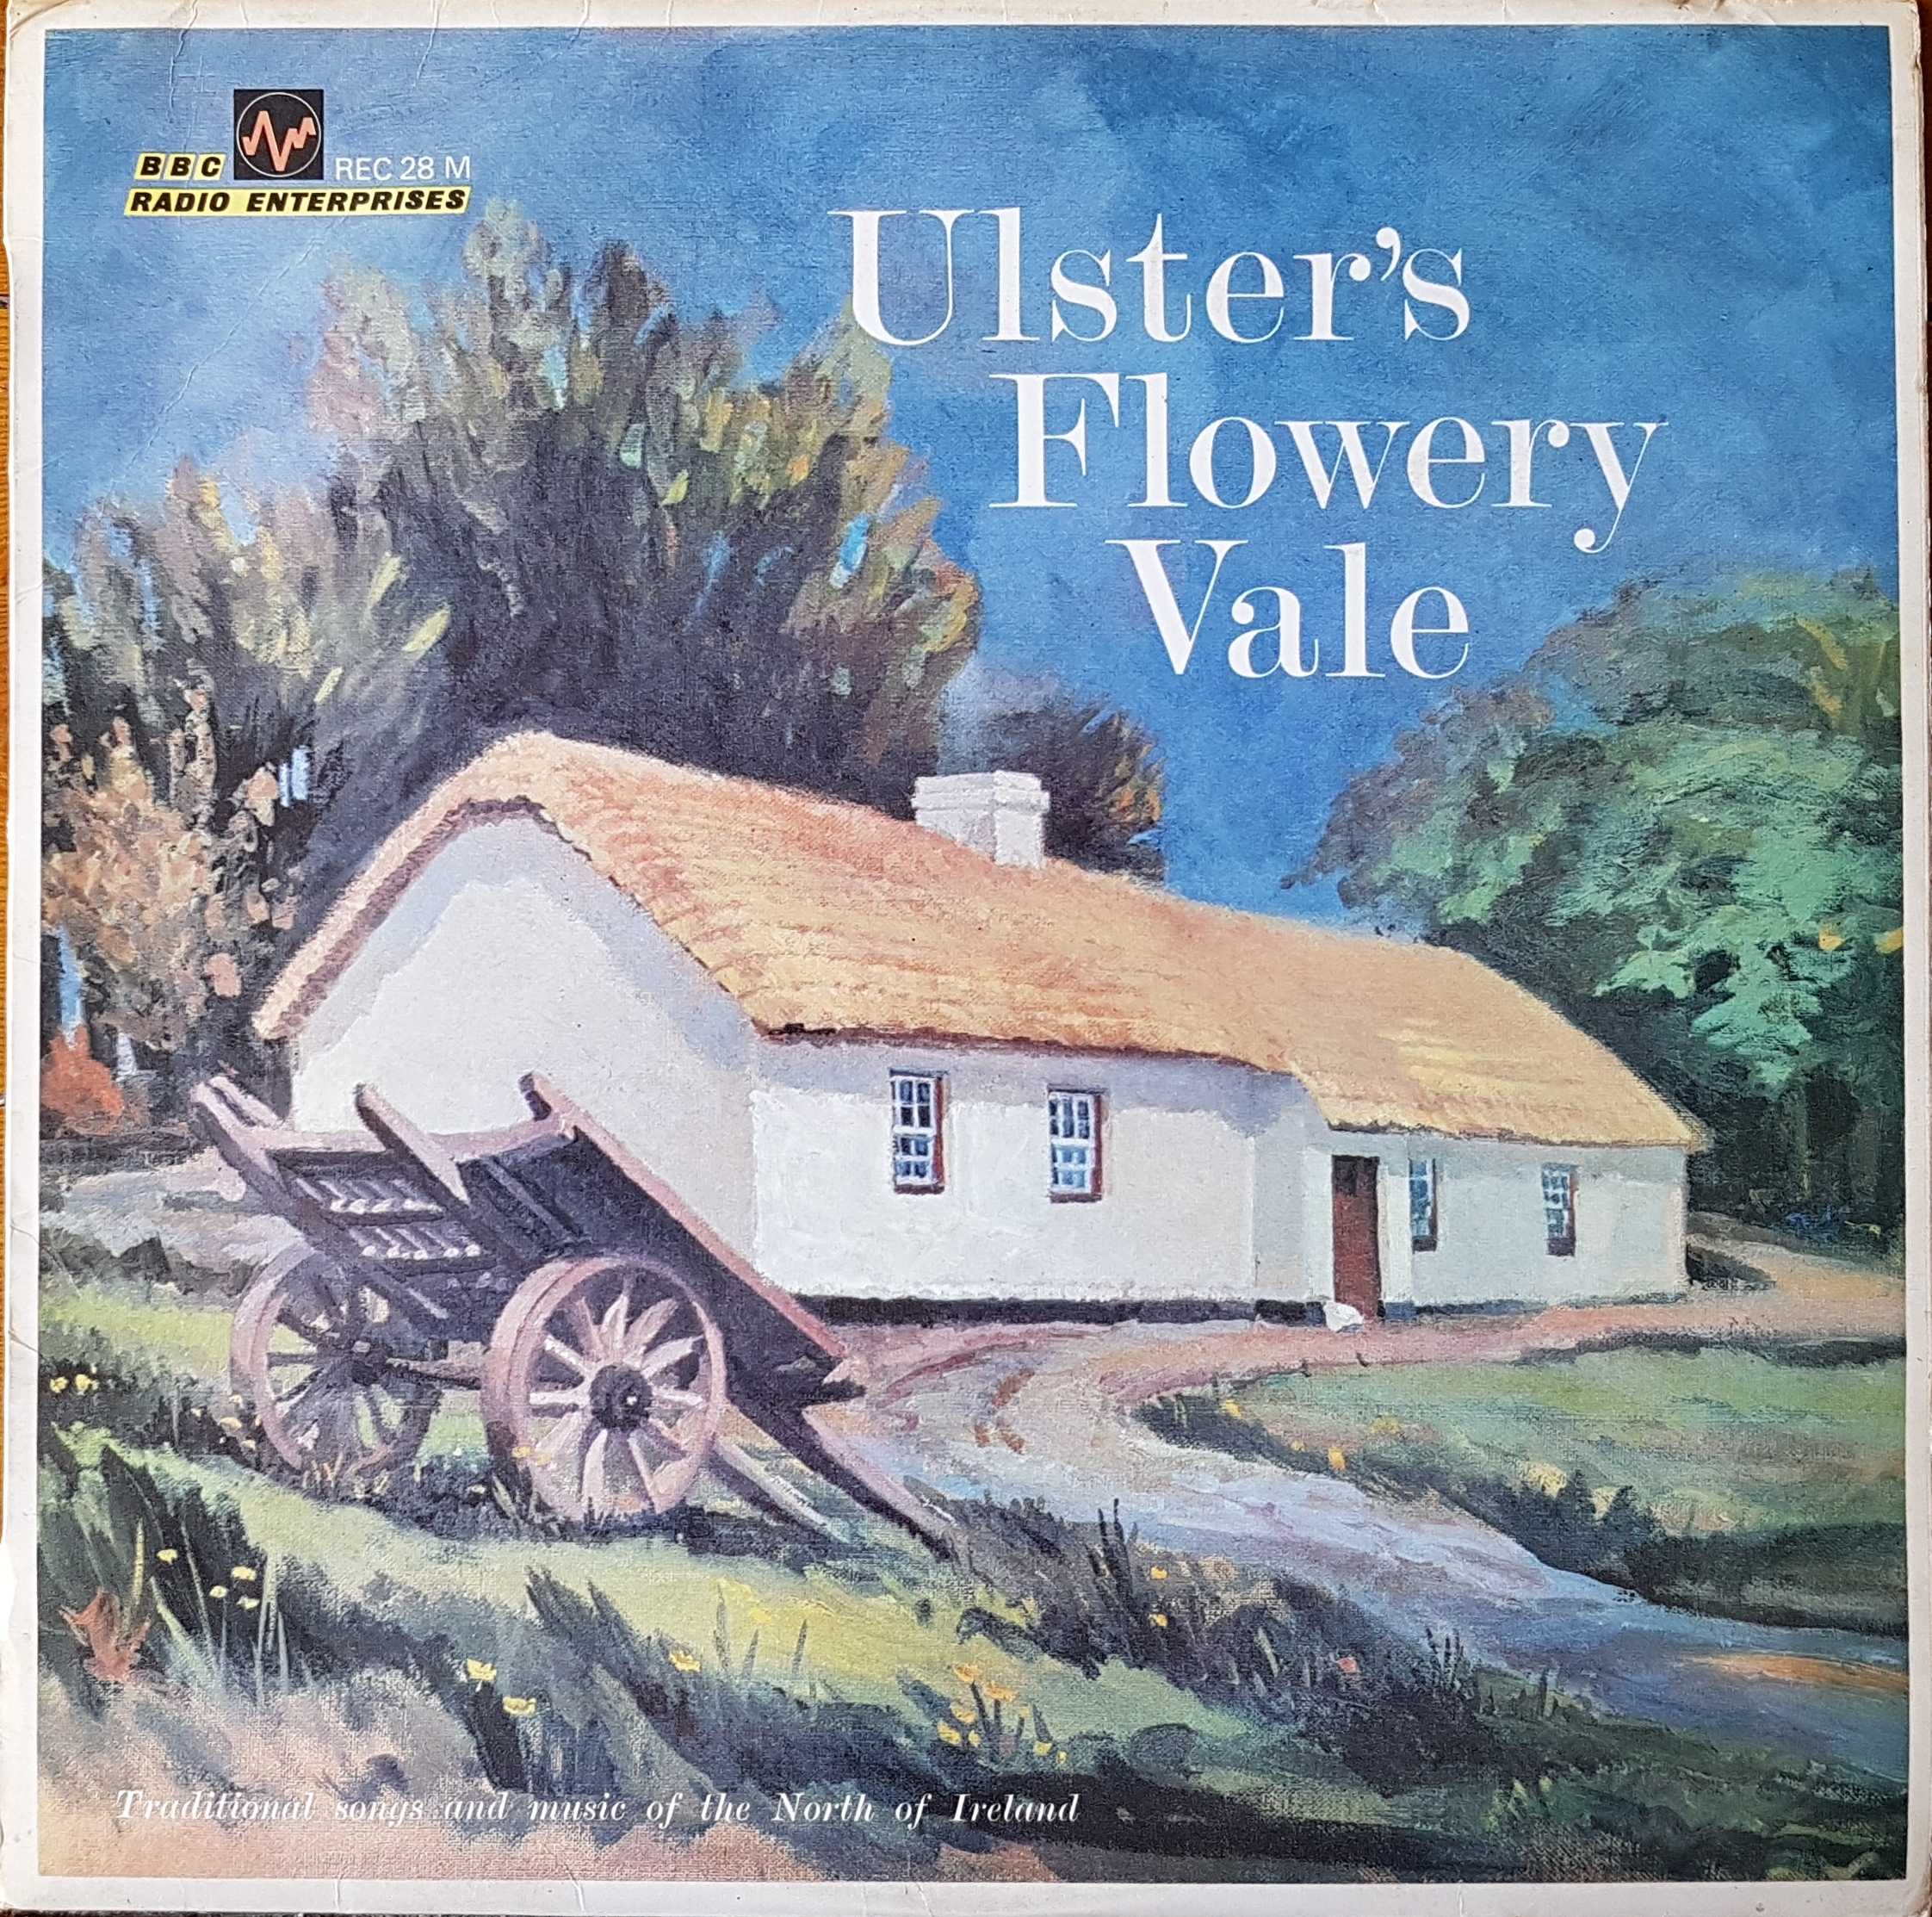 Picture of REC 28 Ulster's flowery vale (Songs and music From the North of Ireland) by artist Various from the BBC albums - Records and Tapes library